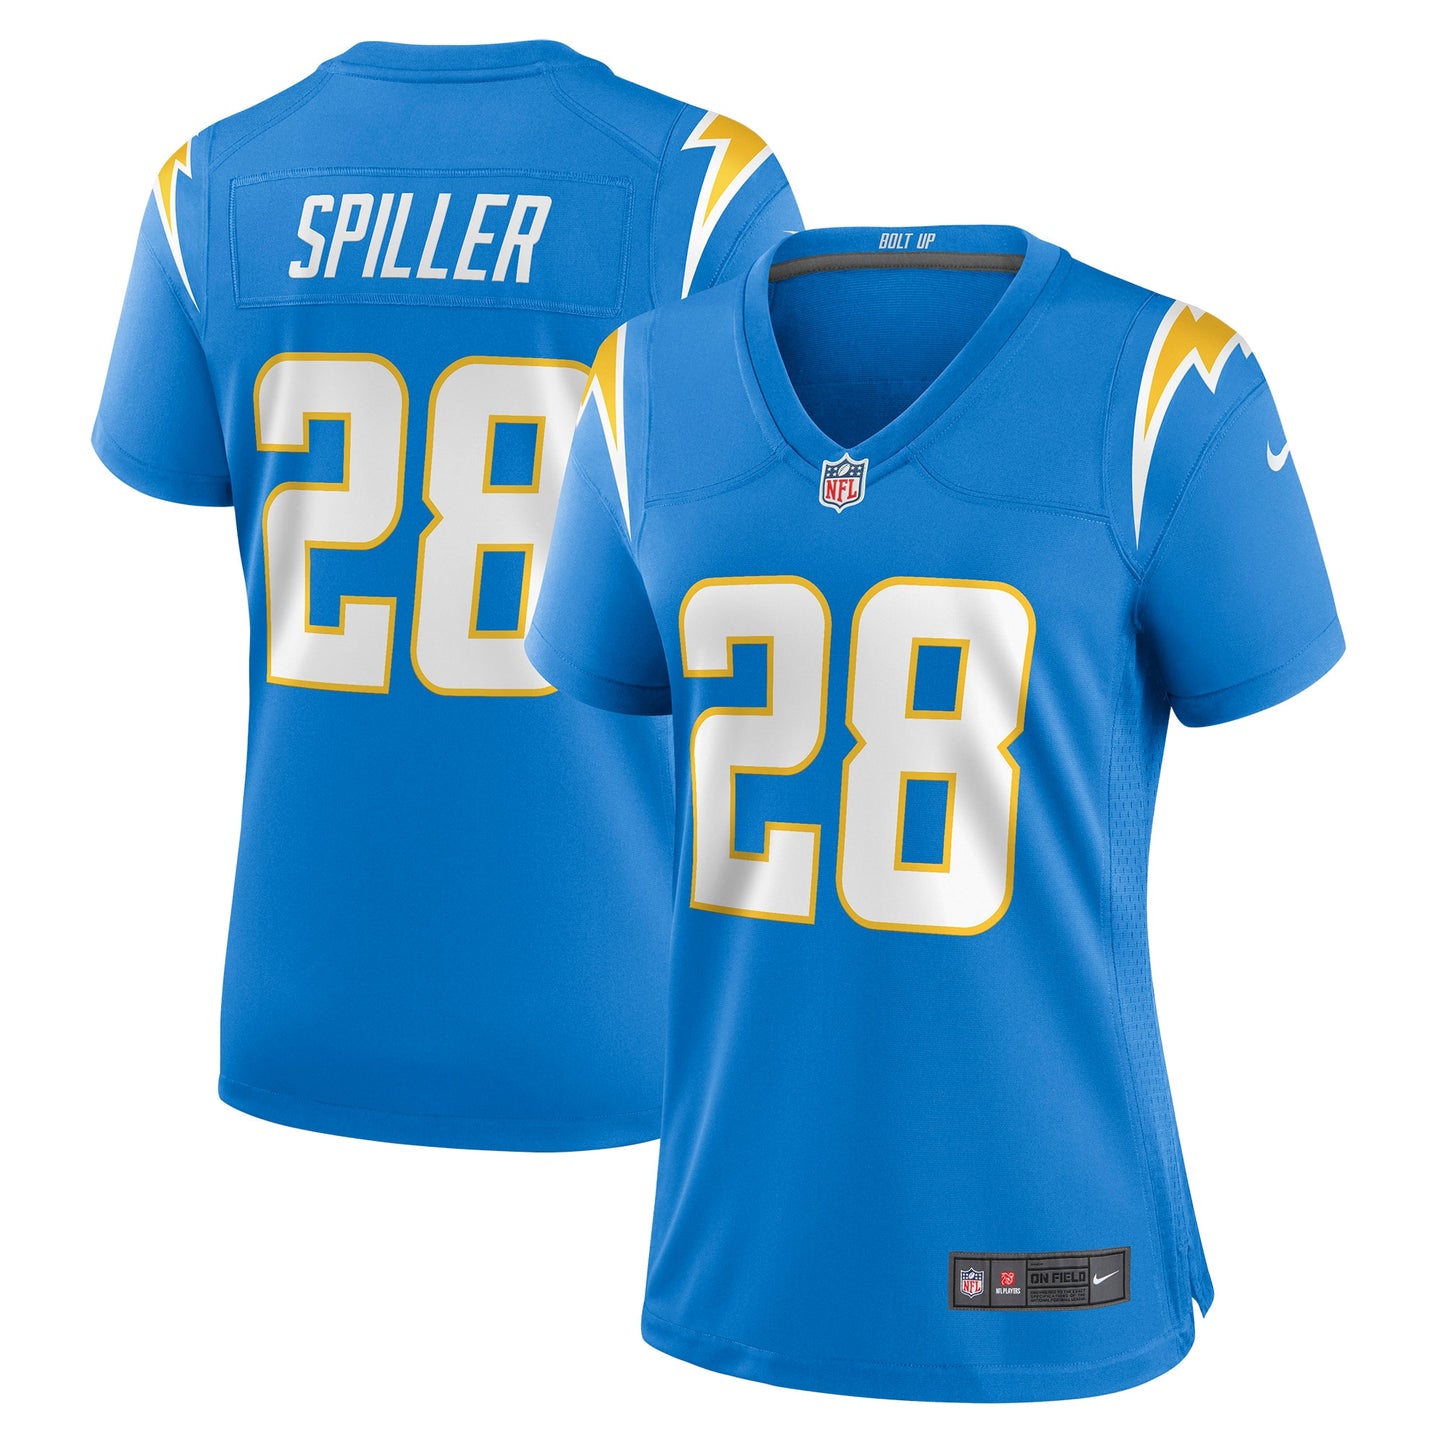 Isaiah Spiller Los Angeles Chargers Nike Women's Game Jersey - Powder Blue